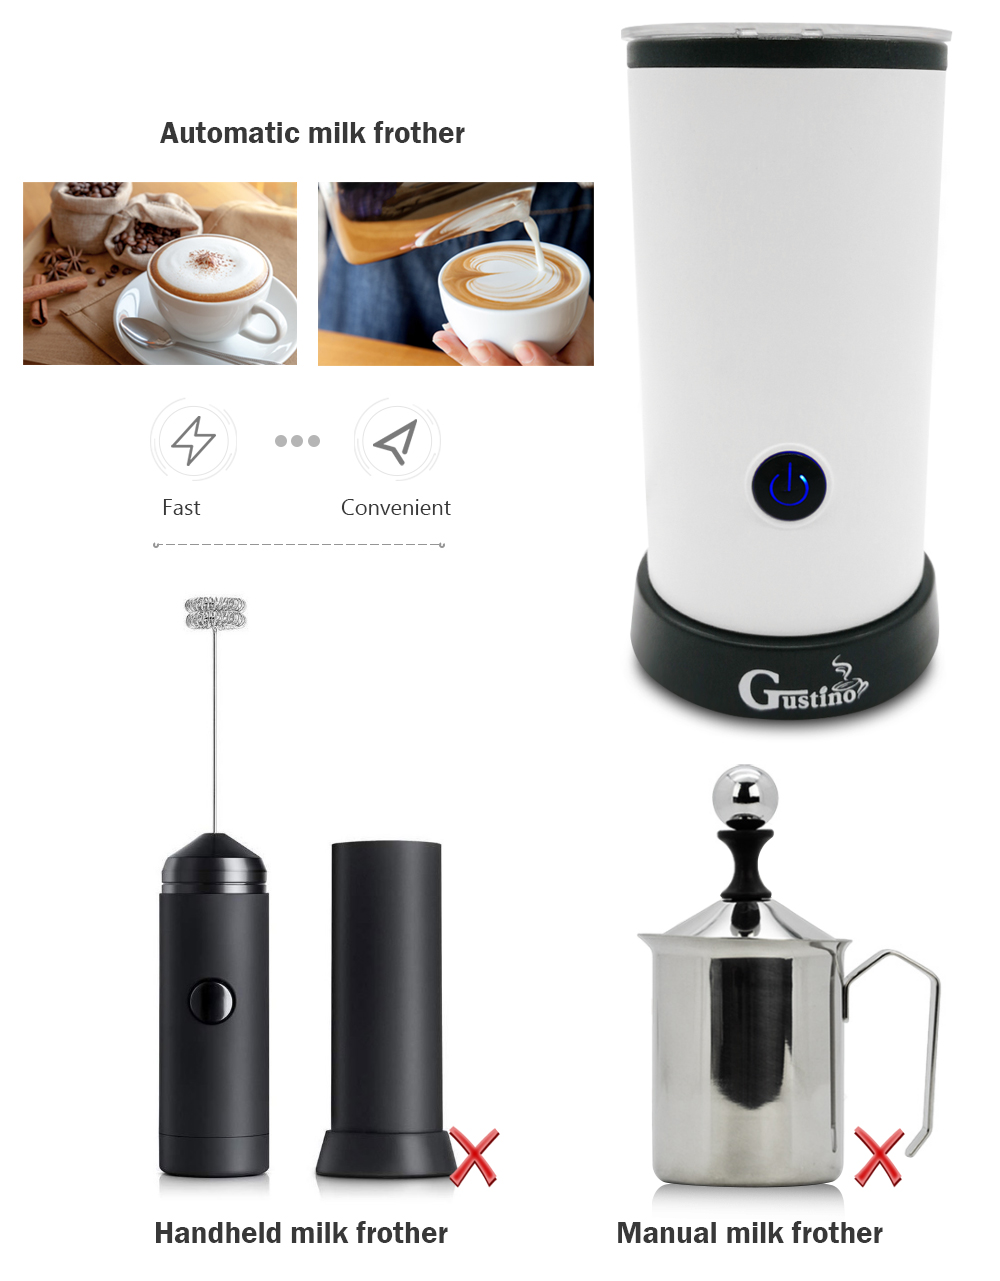 Gustino Electric Automatic Milk Frother Cappuccino Latte Coffee Portable Home Cafe